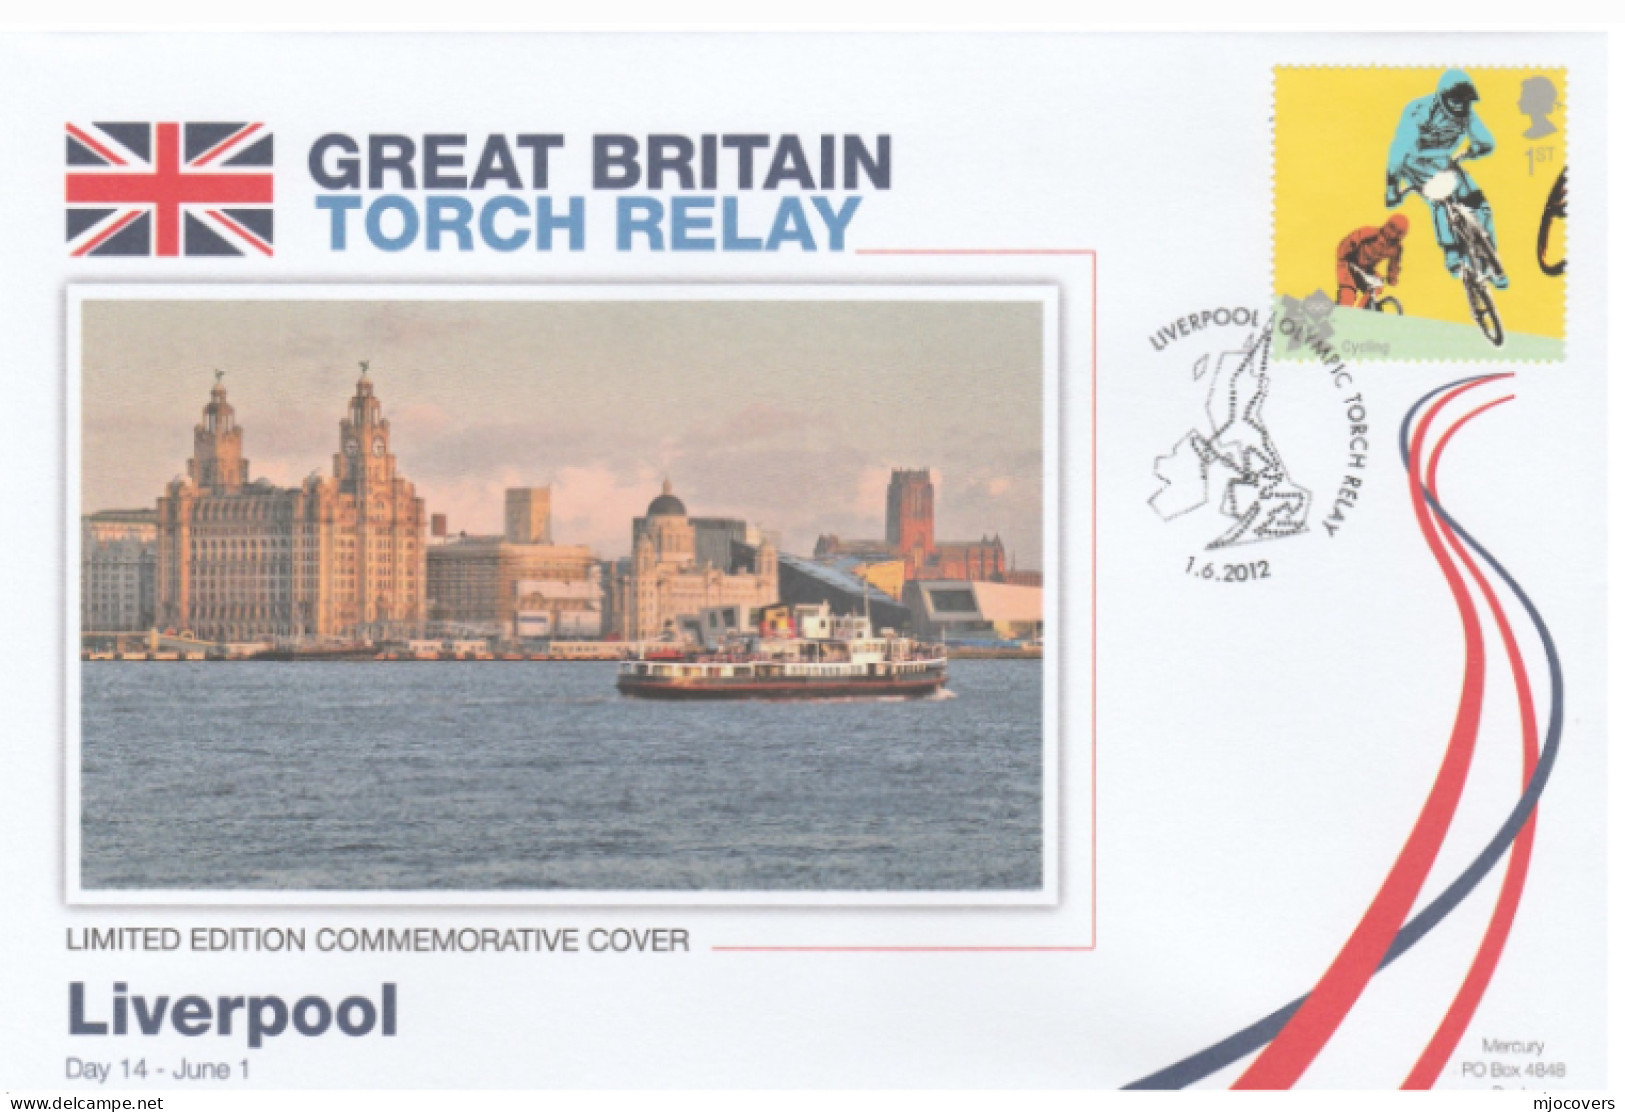 2012 Ltd Edn MERSEY FERRY OLYMPICS TORCH Relay Liverpool COVER London OLYMPIC GAMES Sport BMX Cycling Bicycle  Stamps GB - Sommer 2012: London